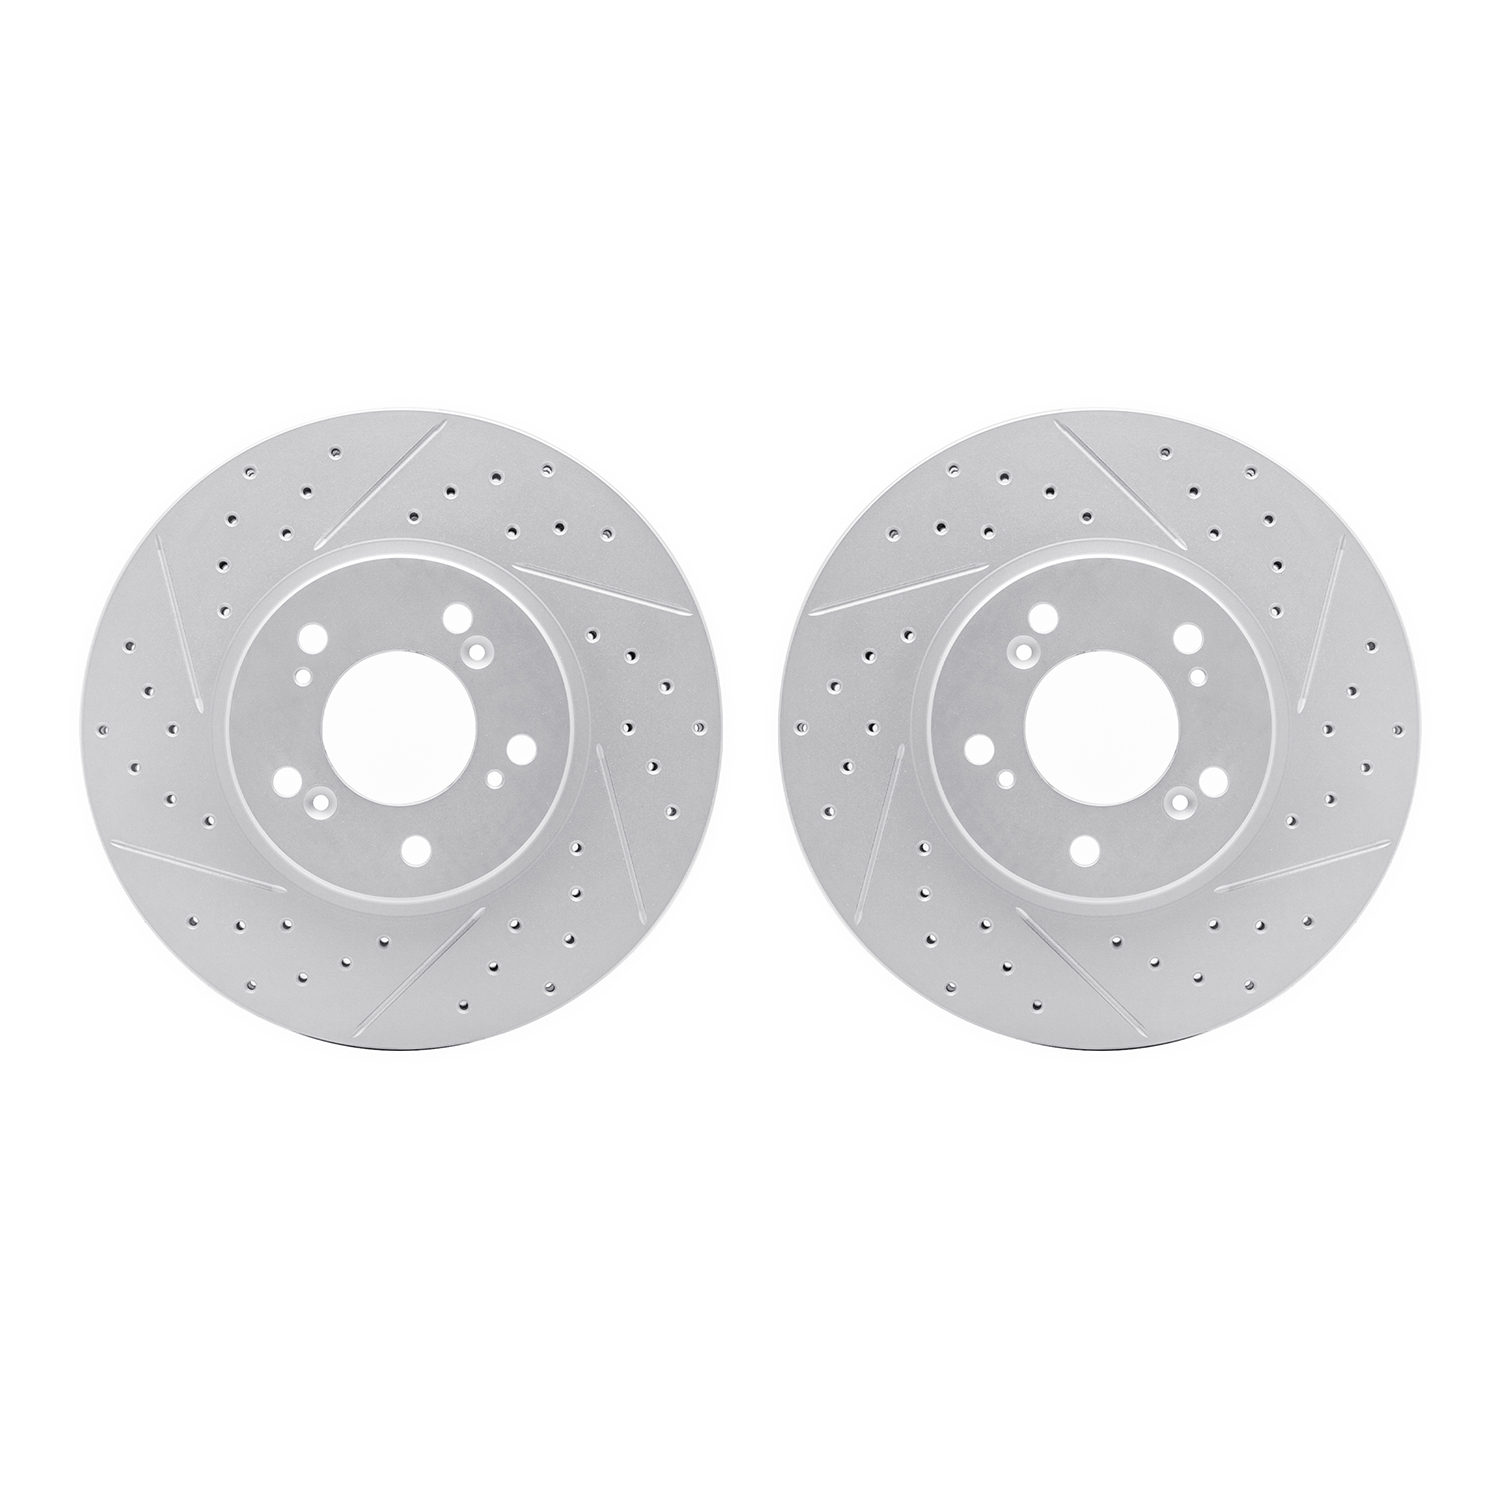 2002-58006 Geoperformance Drilled/Slotted Brake Rotors, 1999-2004 Acura/Honda, Position: Front